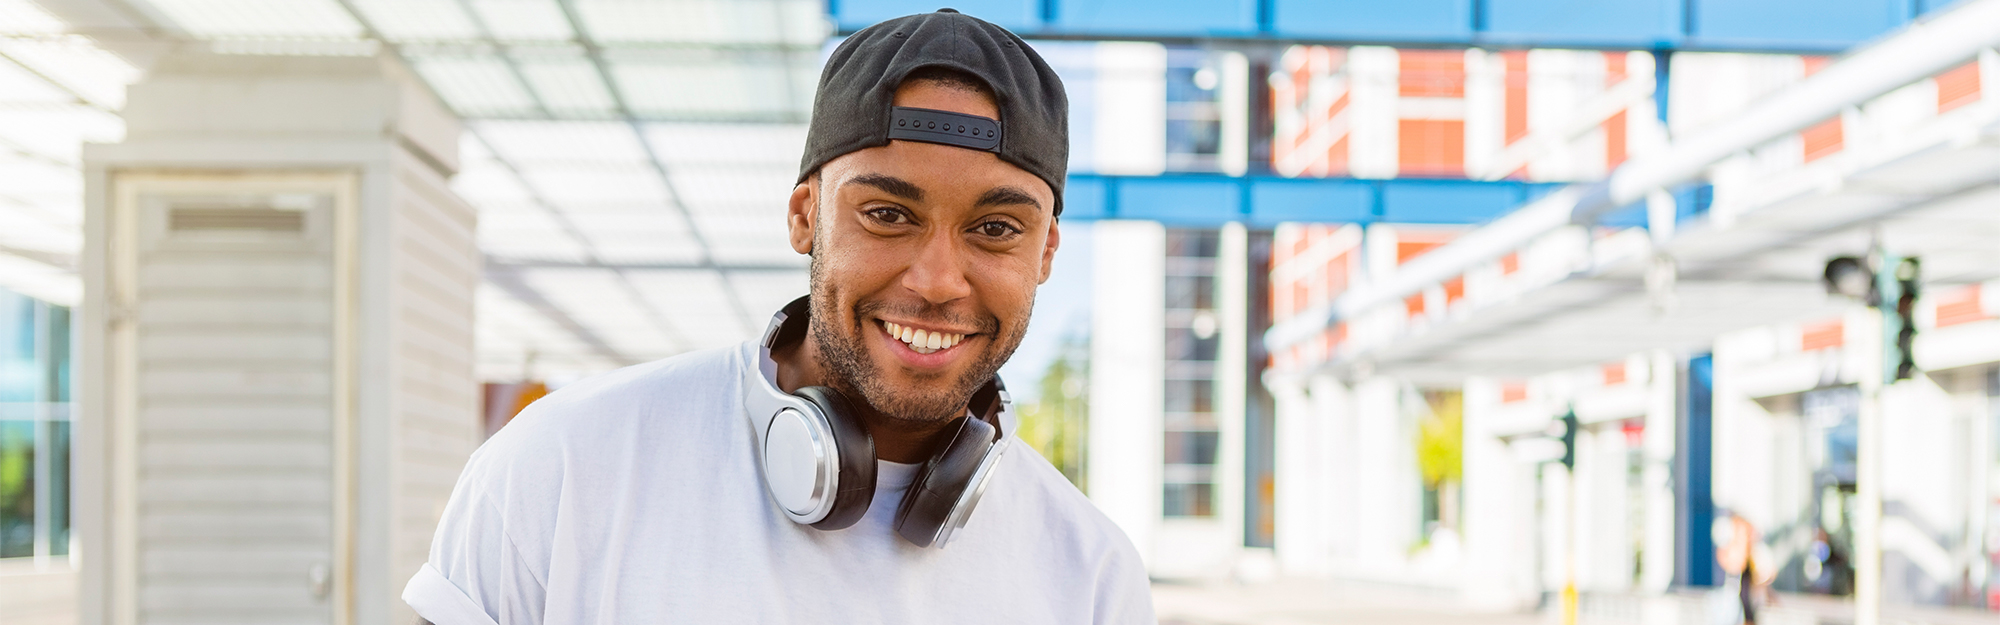 Smiling young man with headphones and smartphone waiting at tram stop.